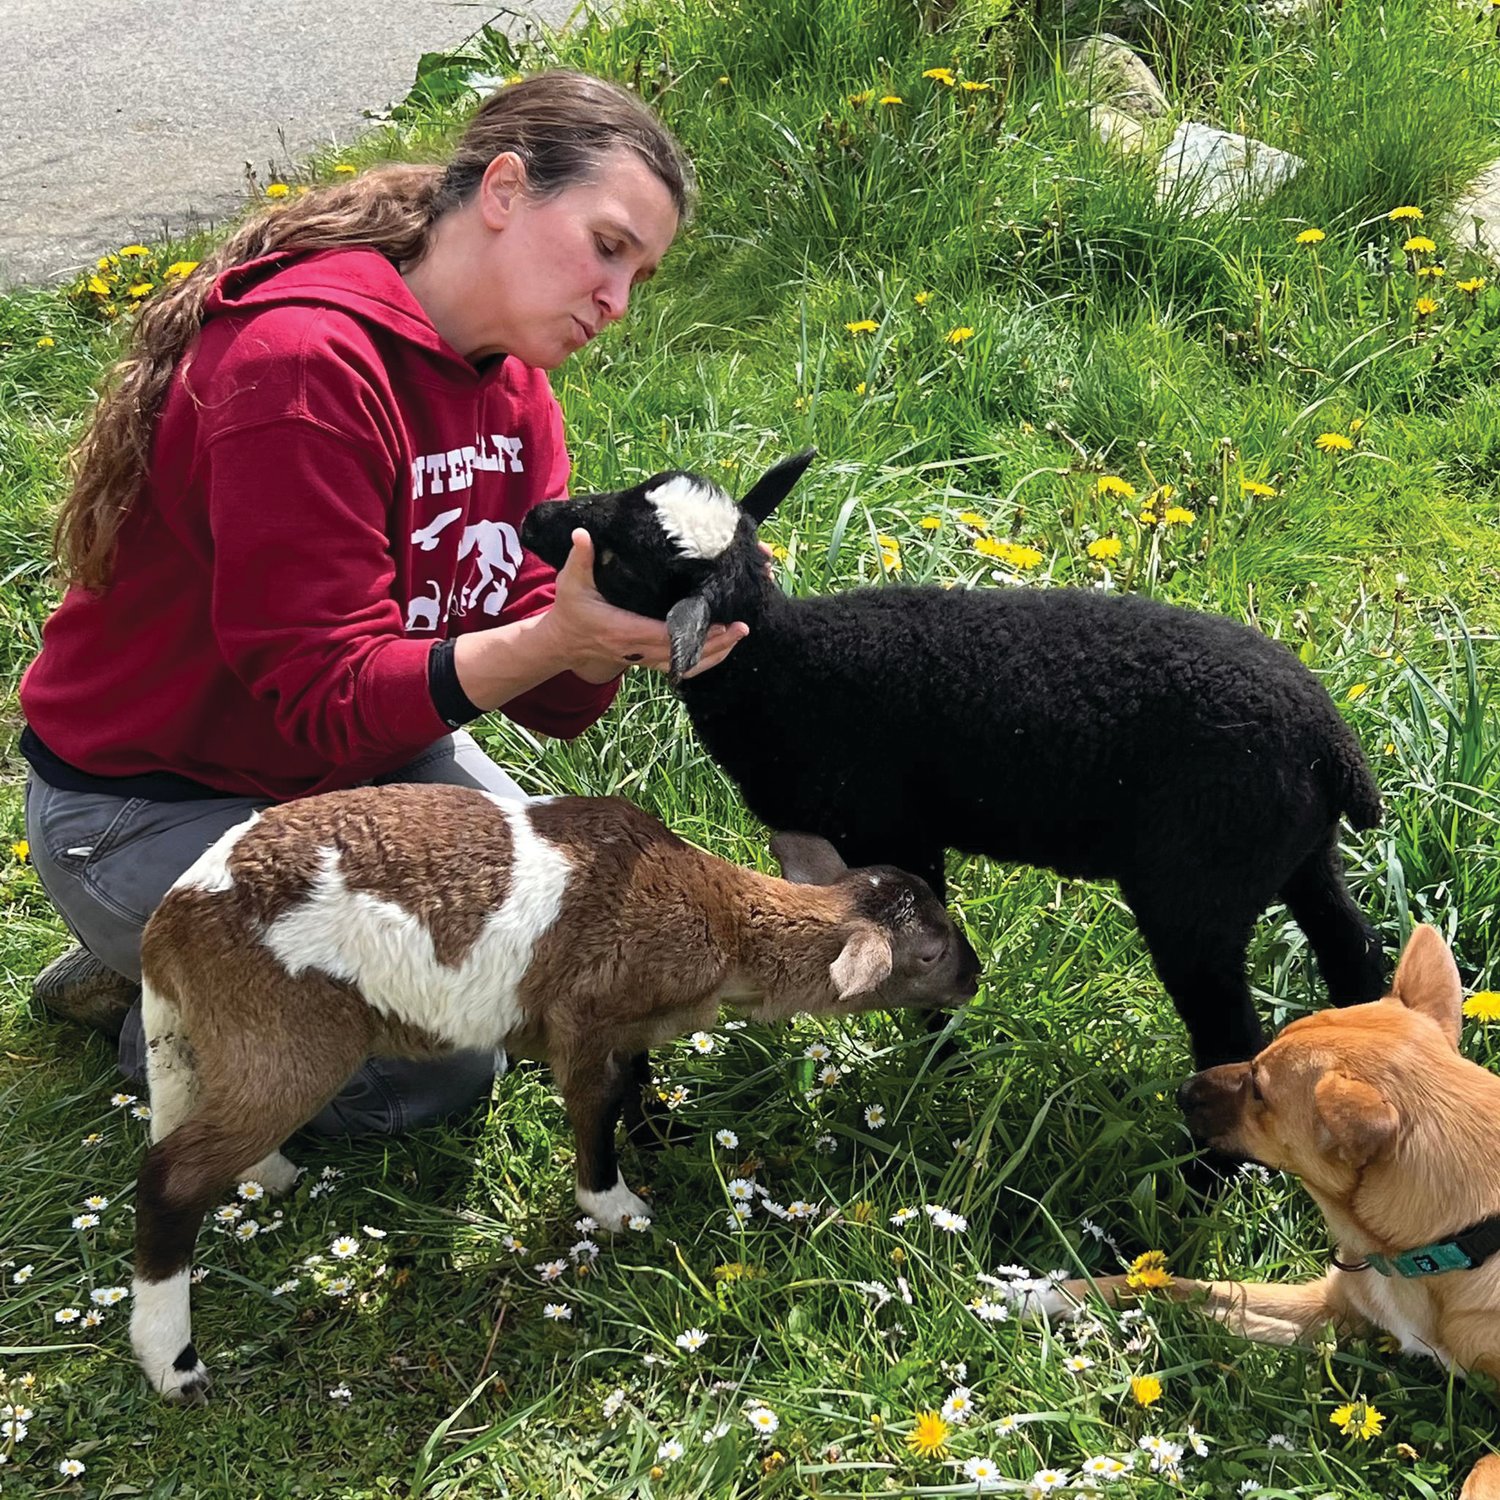 Sara Penhallegon of Center Valley Animal Rescue plays with Henry the black sheep and Bunnie the brown and white sheep.